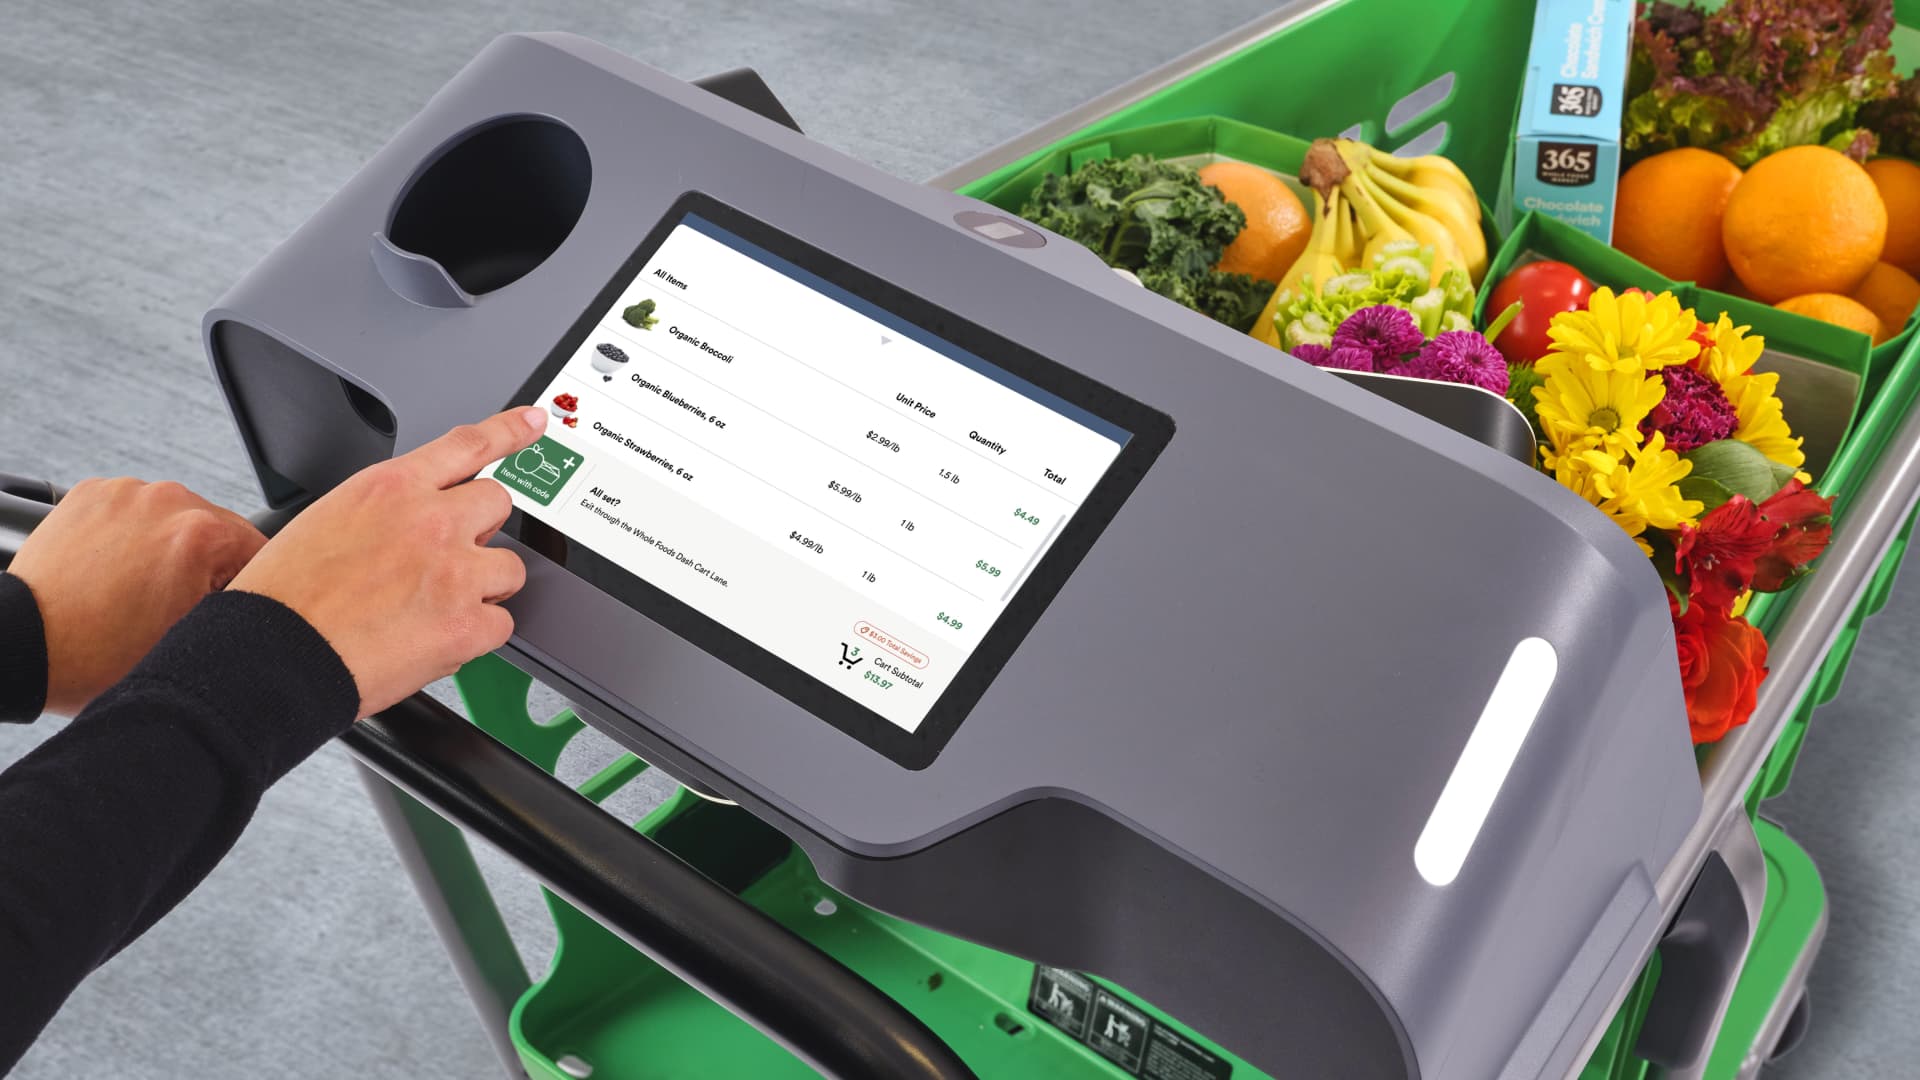 Amazon's smart grocery carts are coming to some Whole Foods stores - CNBC